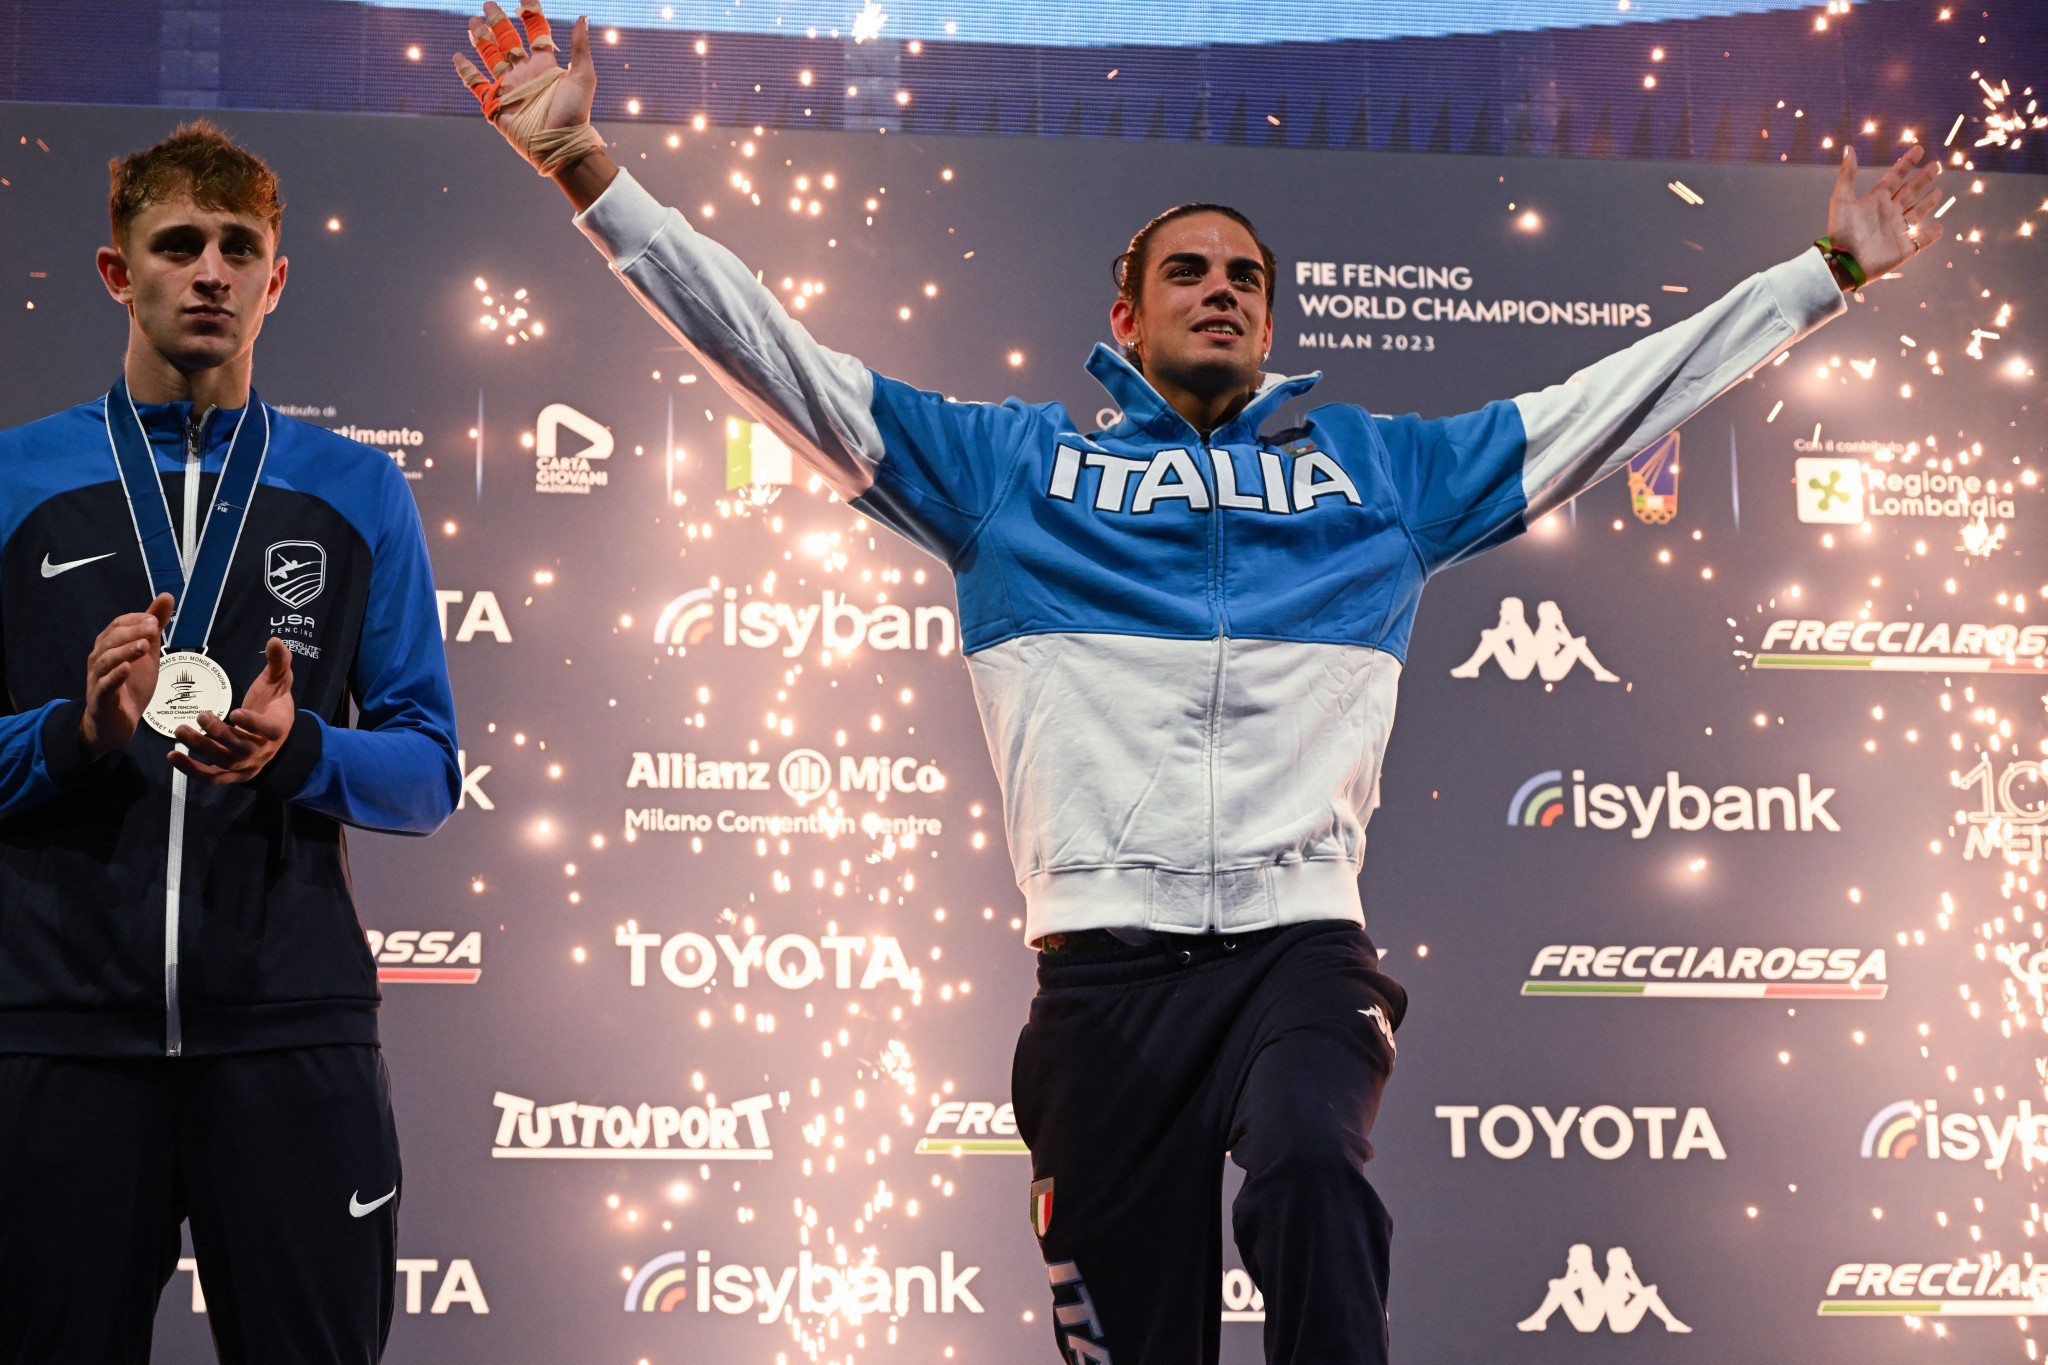 Marini wins host Italy's second gold of FIE Fencing World Championships in Milan and Emura defends title